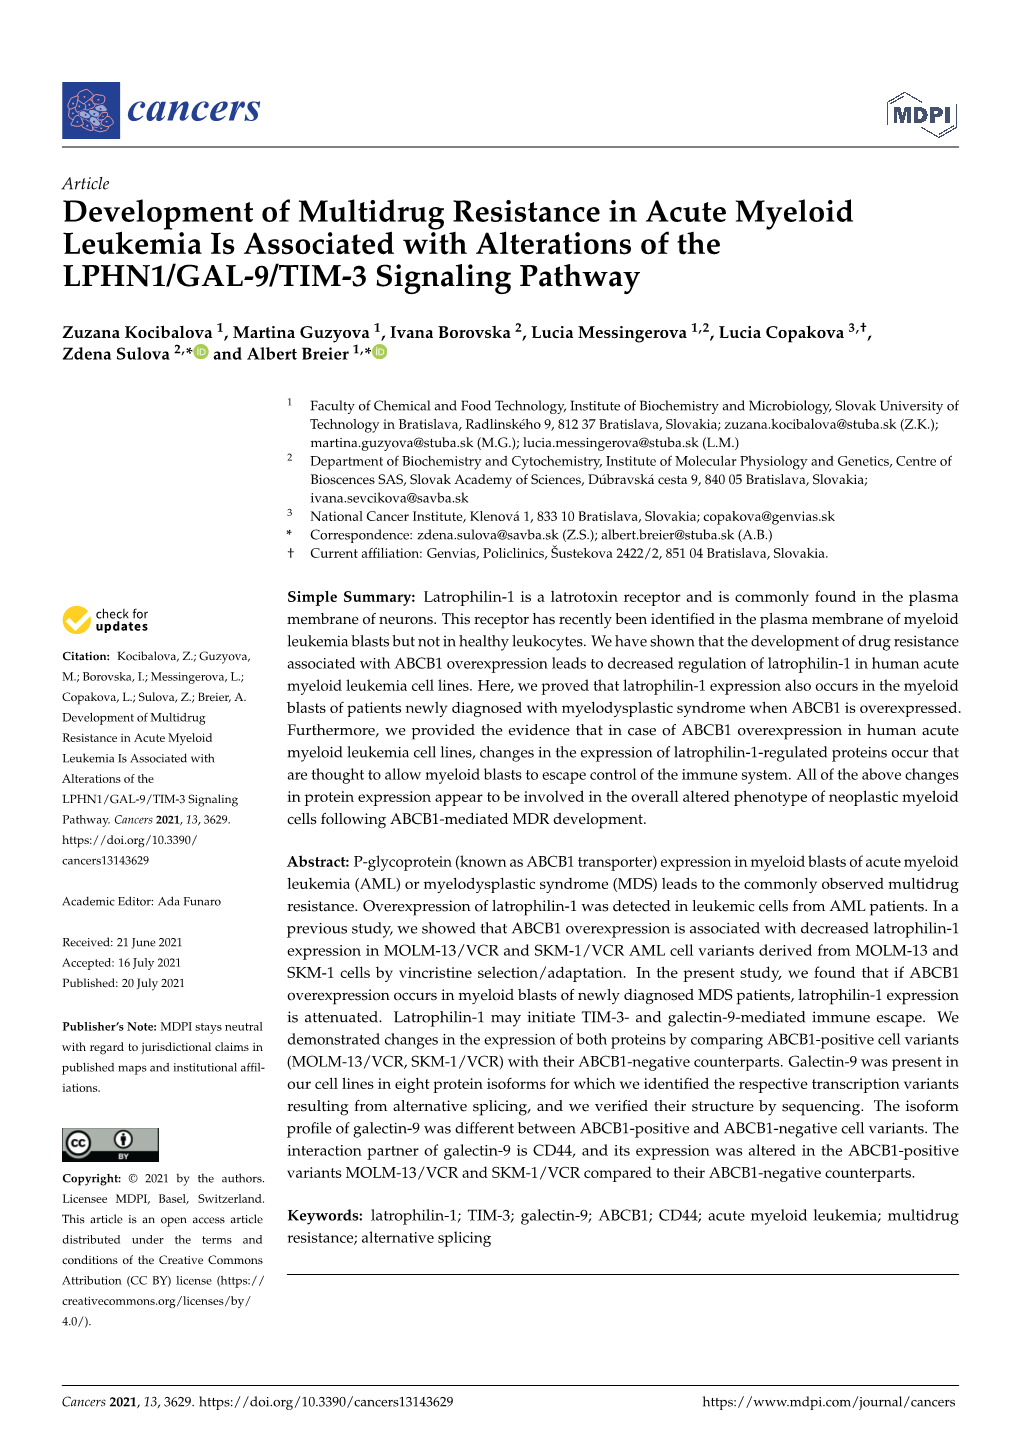 Development of Multidrug Resistance in Acute Myeloid Leukemia Is Associated with Alterations of the LPHN1/GAL-9/TIM-3 Signaling Pathway